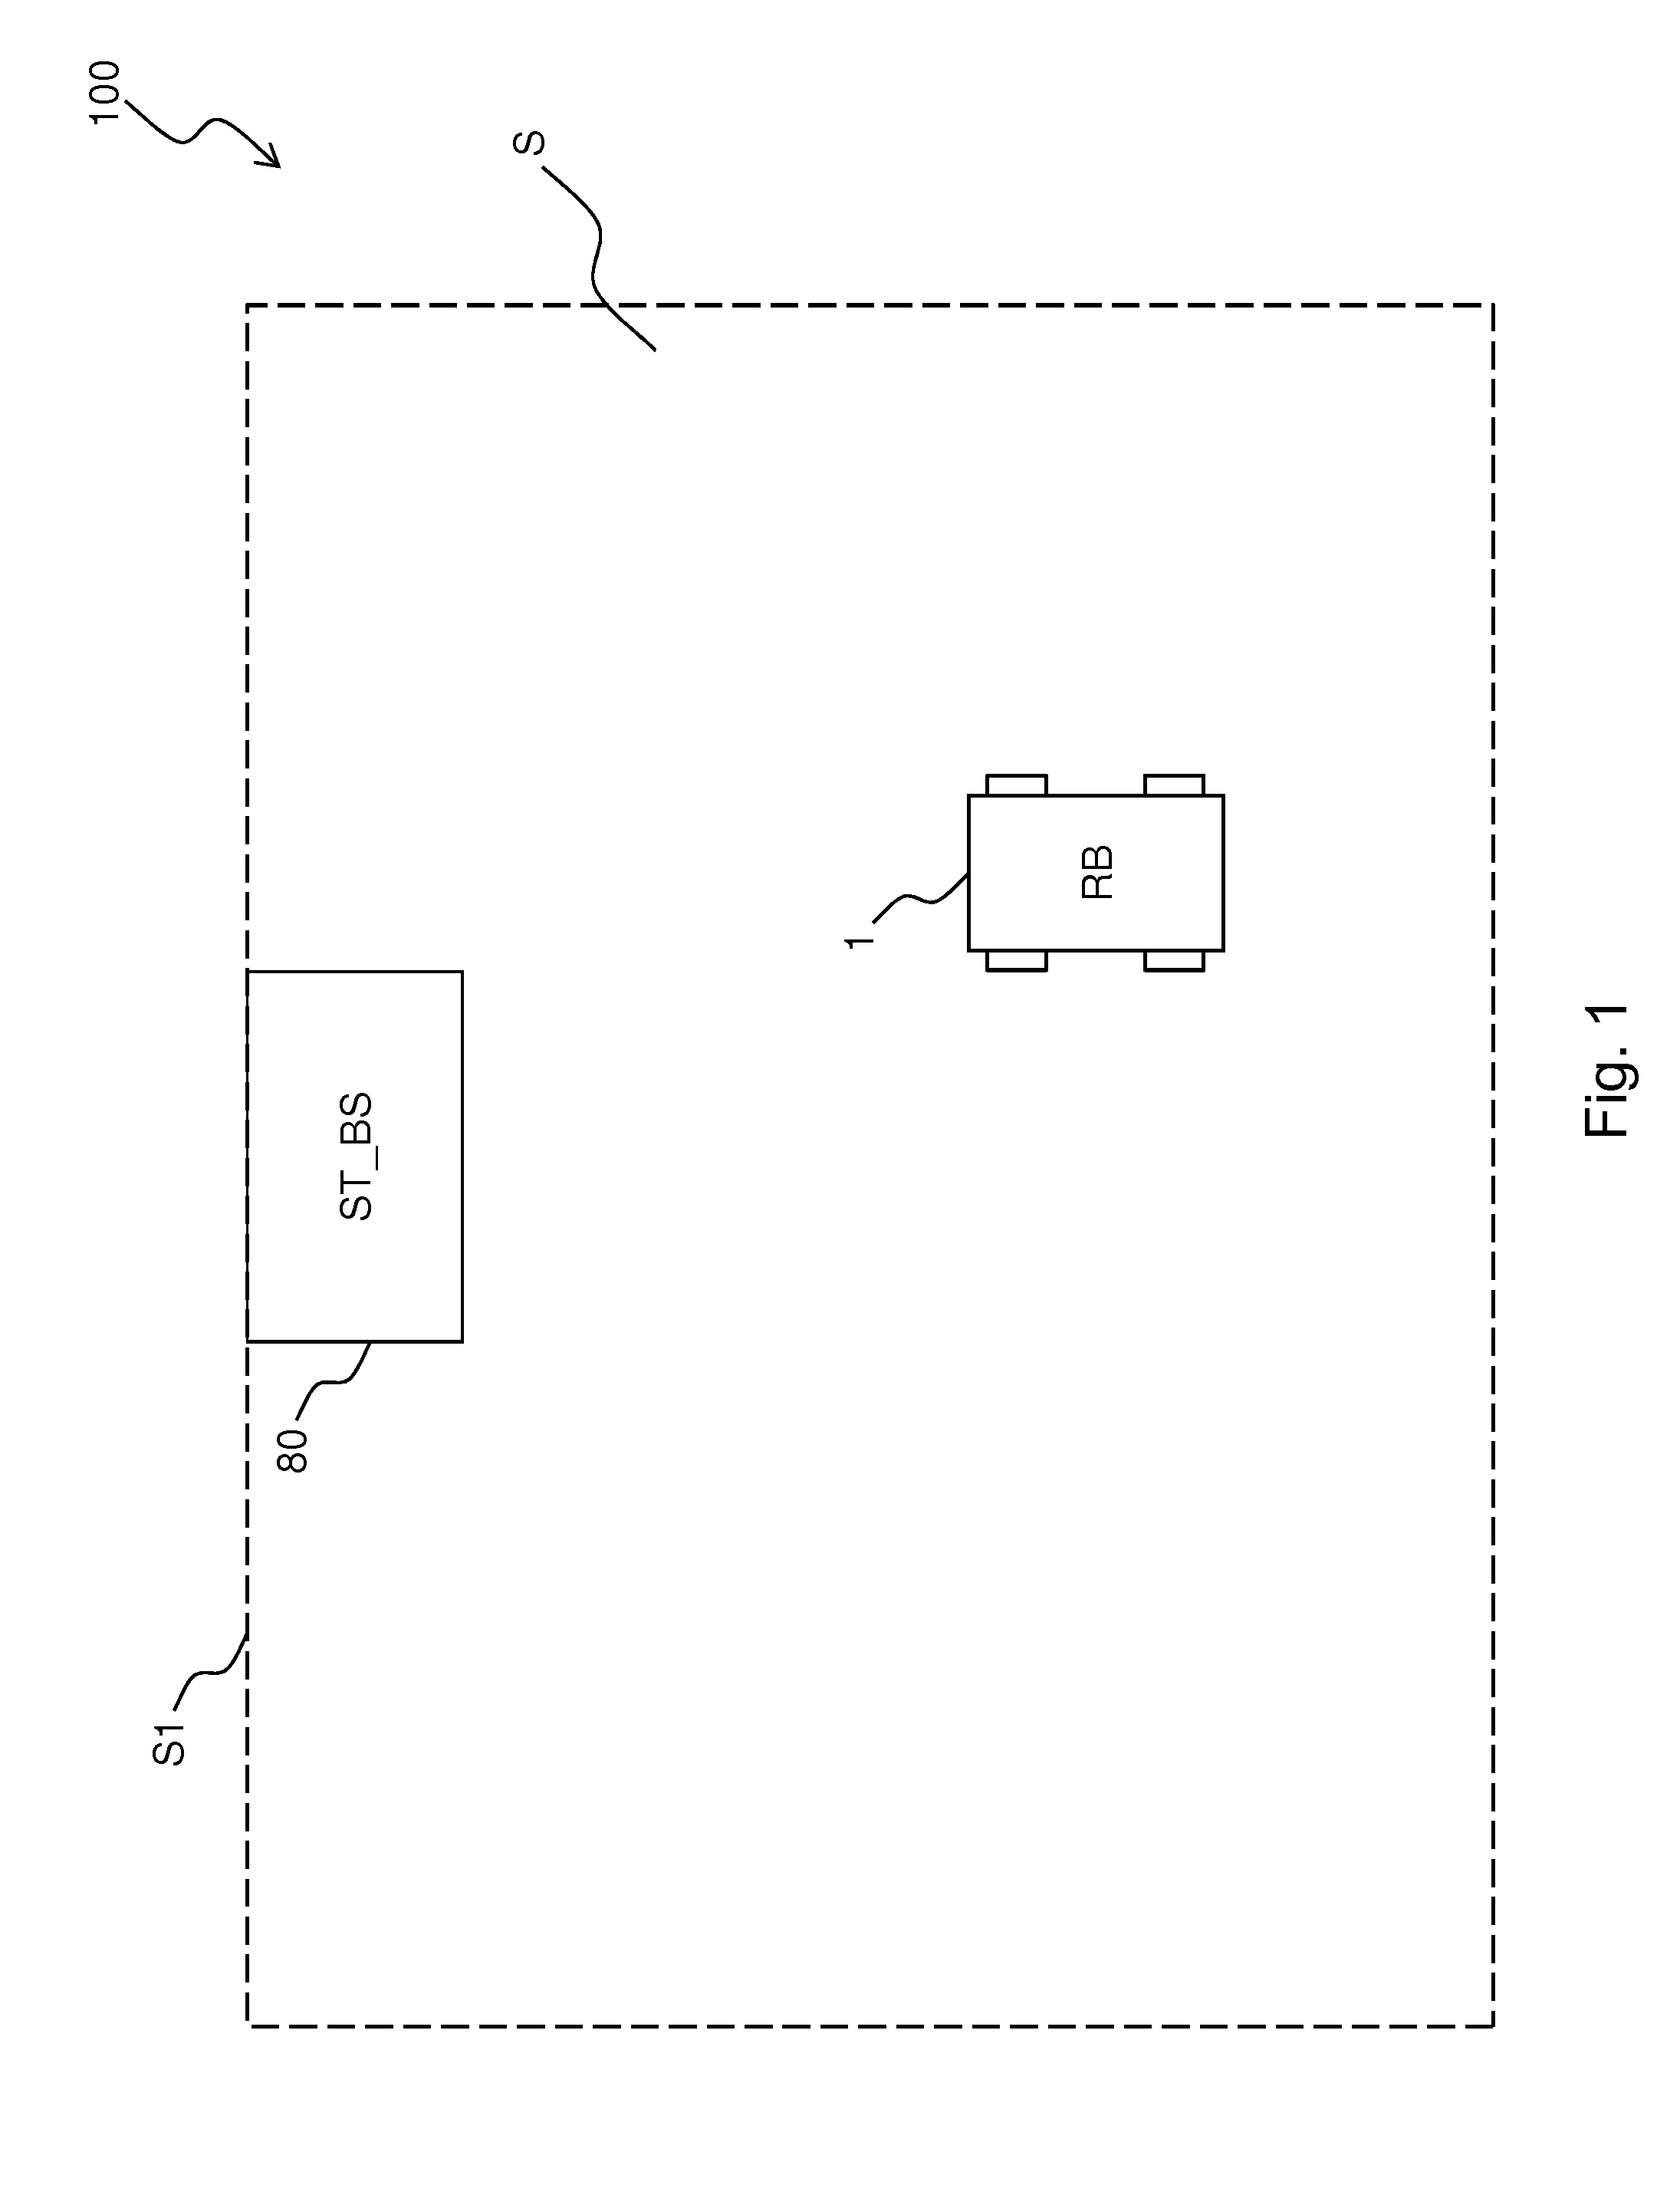 Working apparatus for a limited area